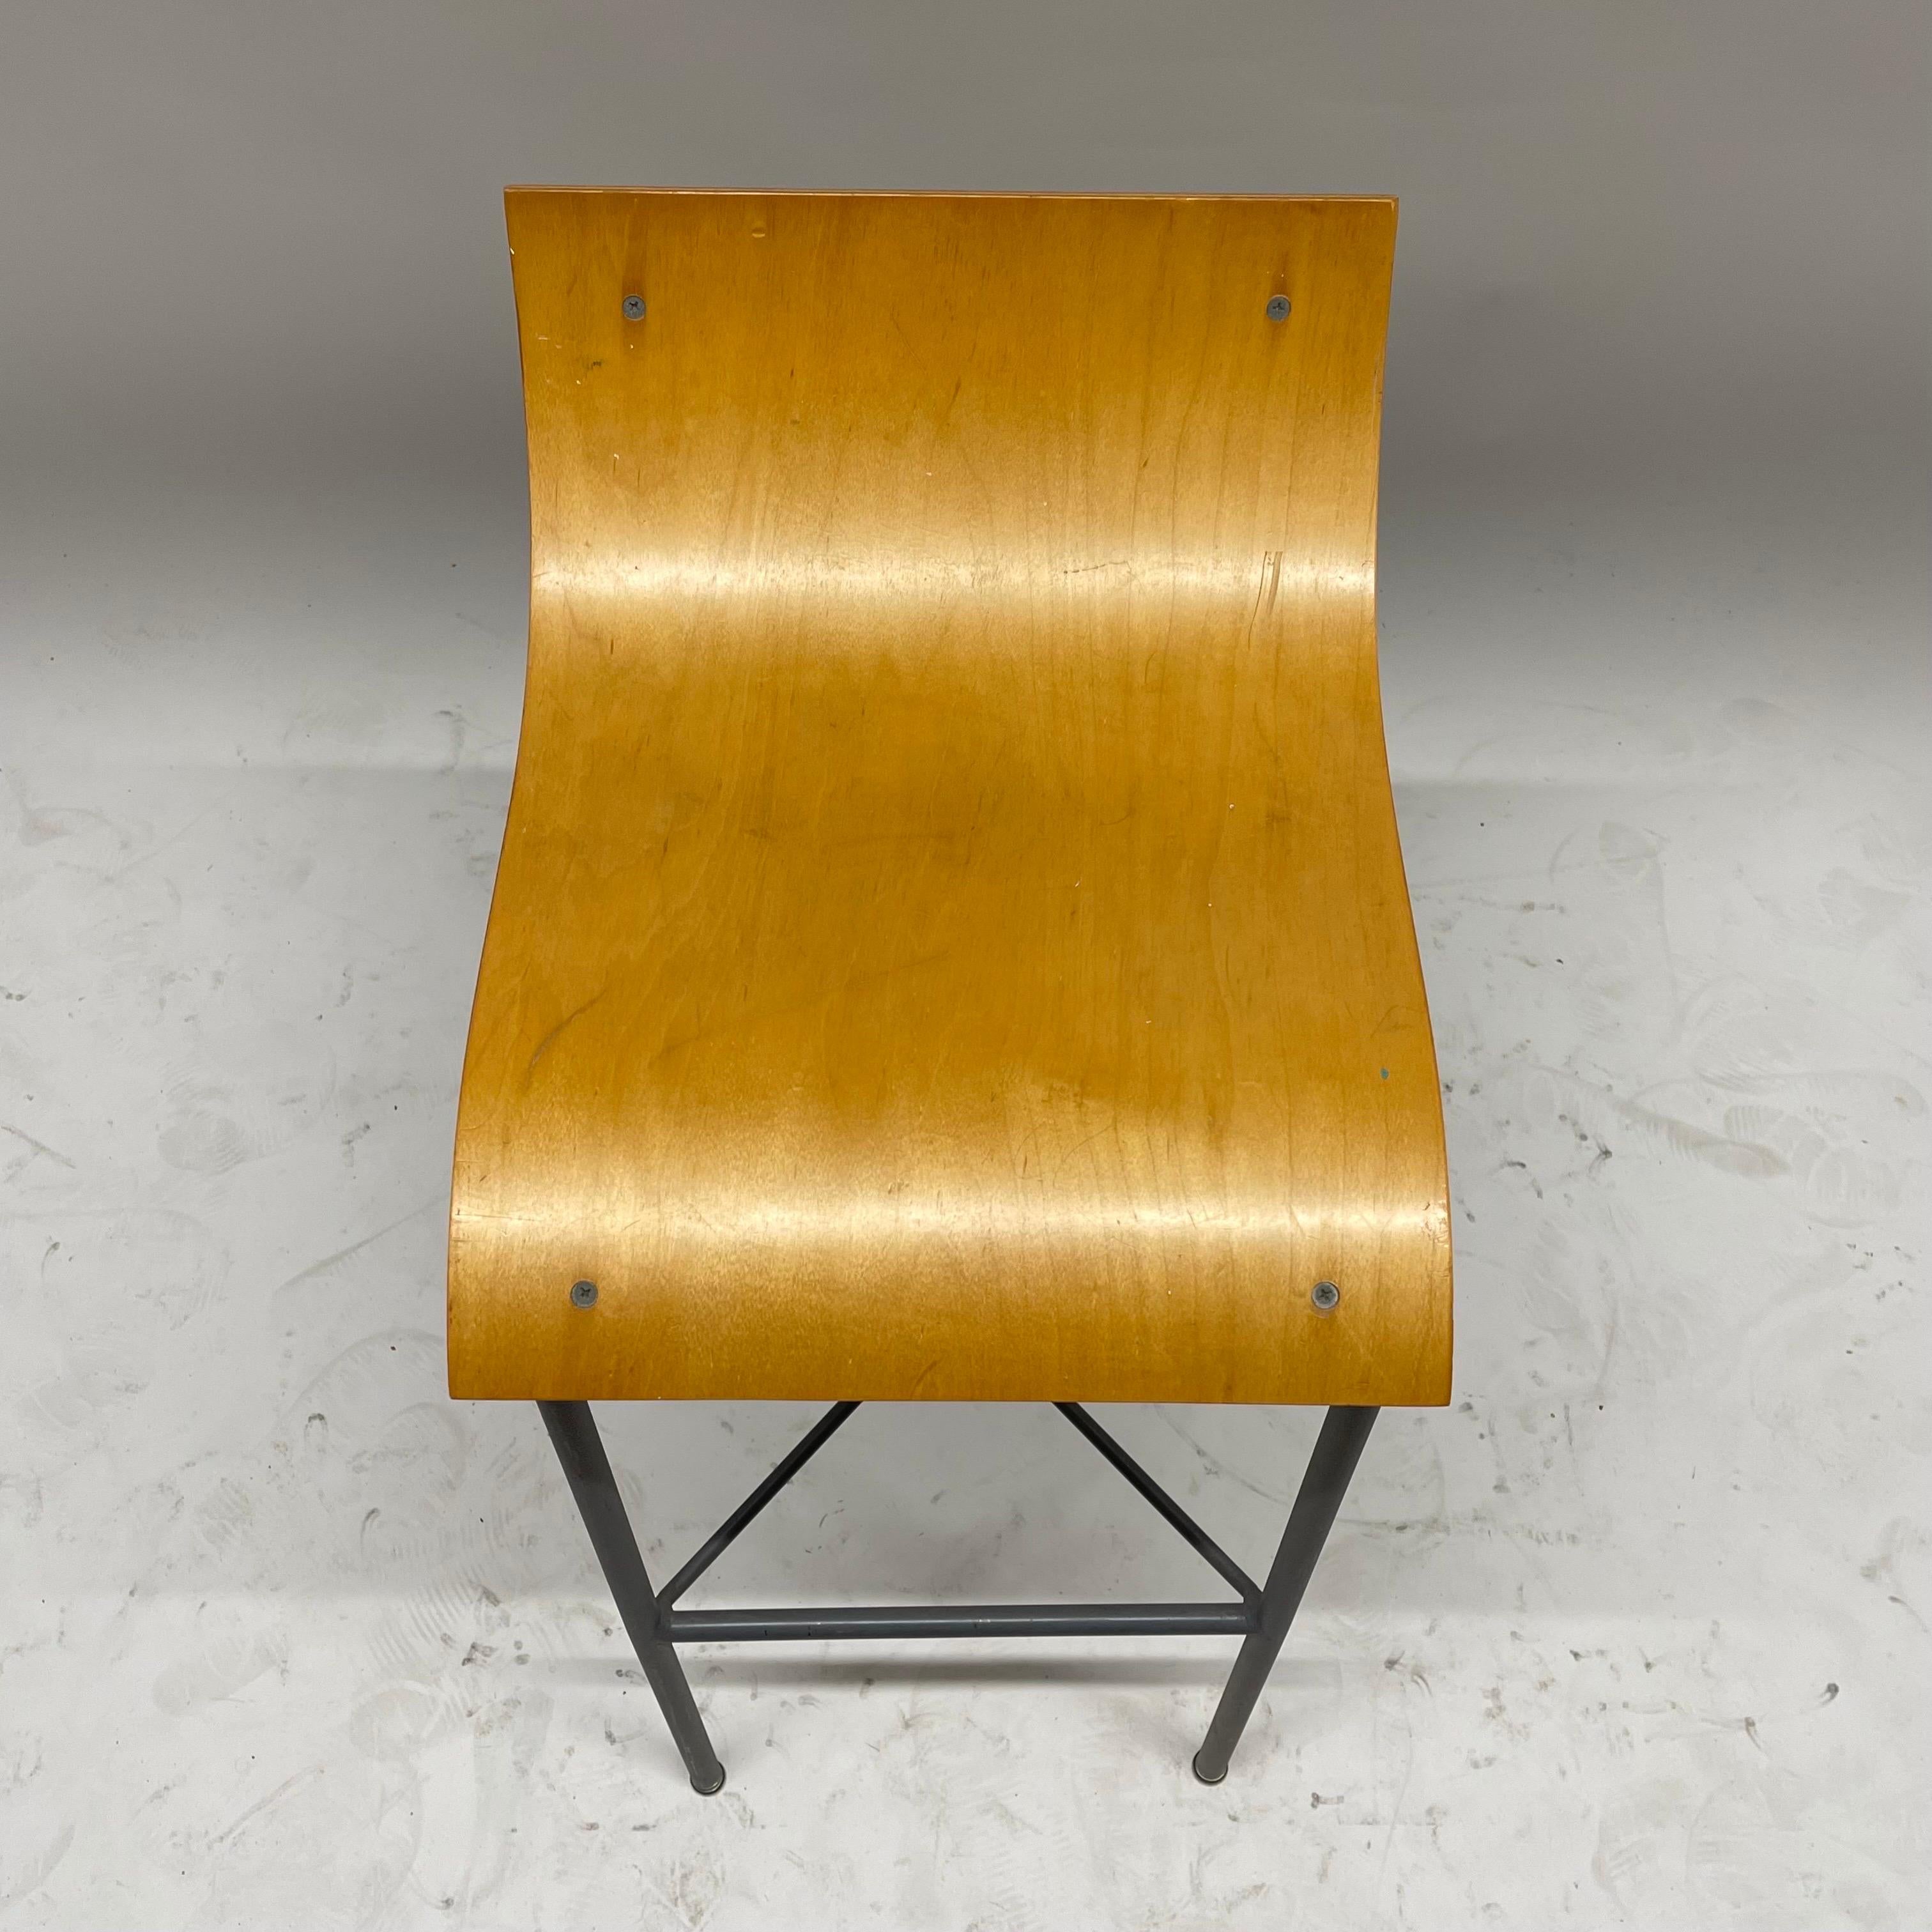 Pair of Post Modern Sculptural Steel and Bent Plywood Bar Stools, circa 1980s For Sale 3